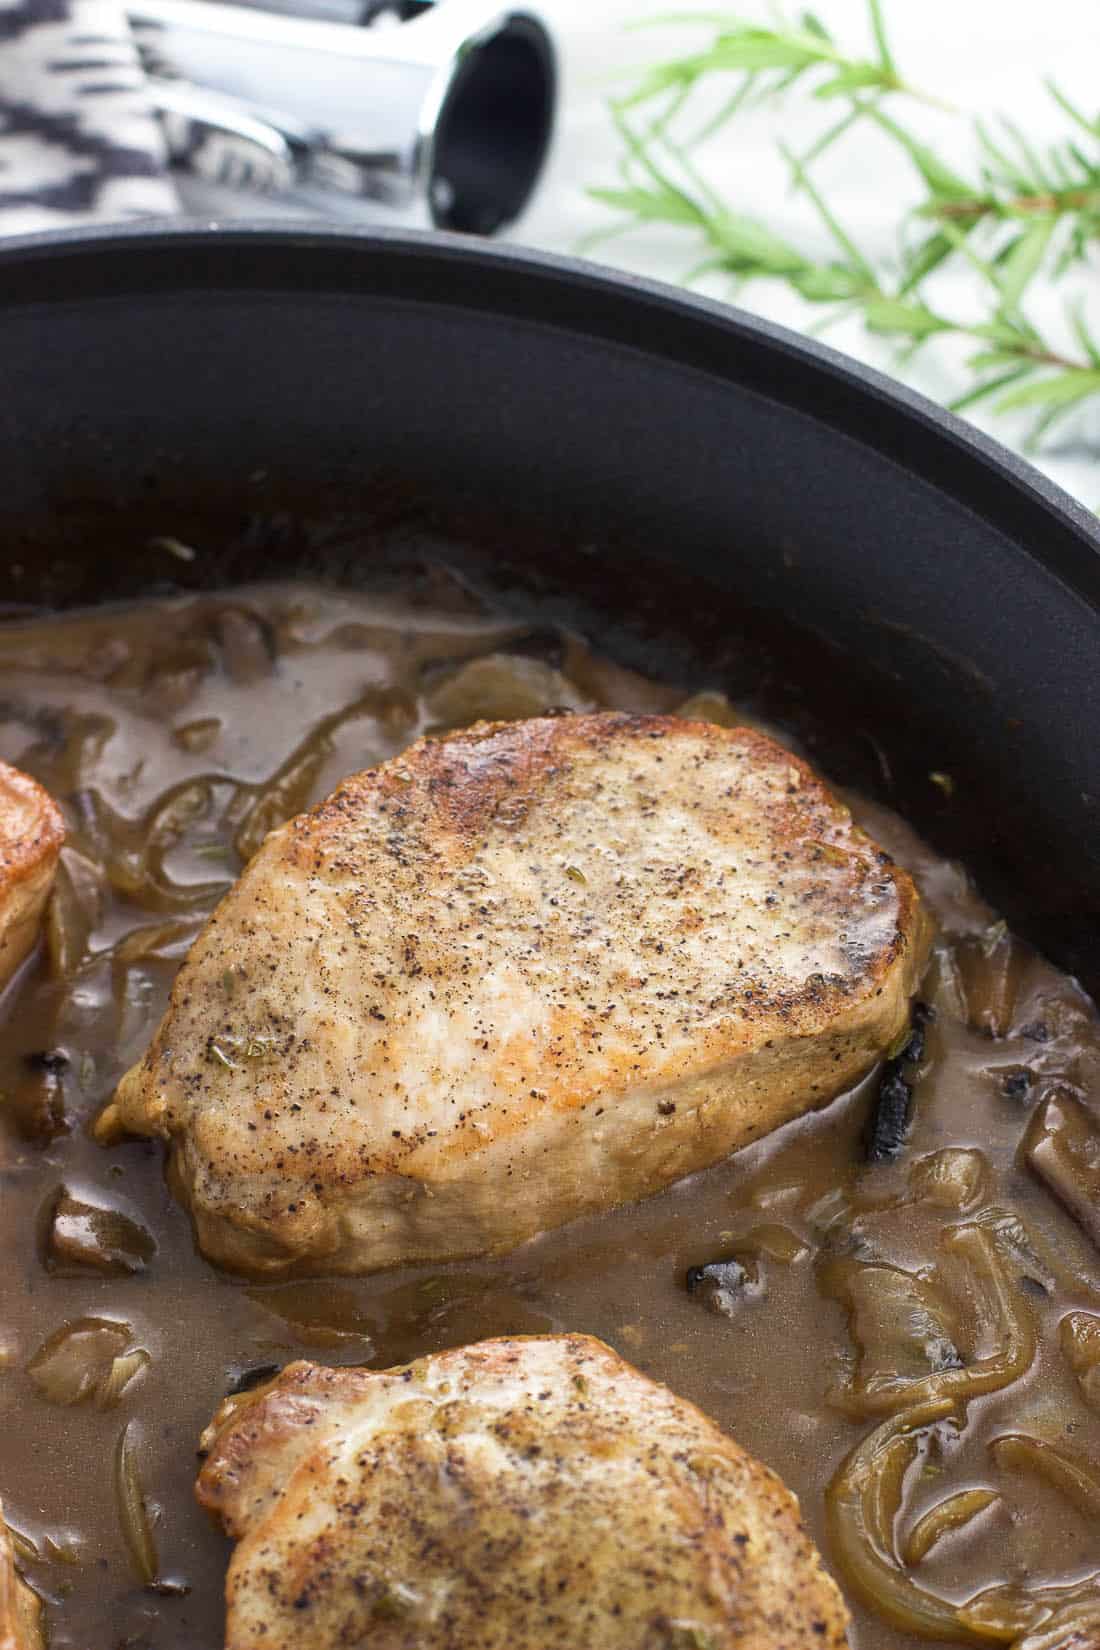 Seared pork chops in a skillet with sauce, mushrooms, and onions